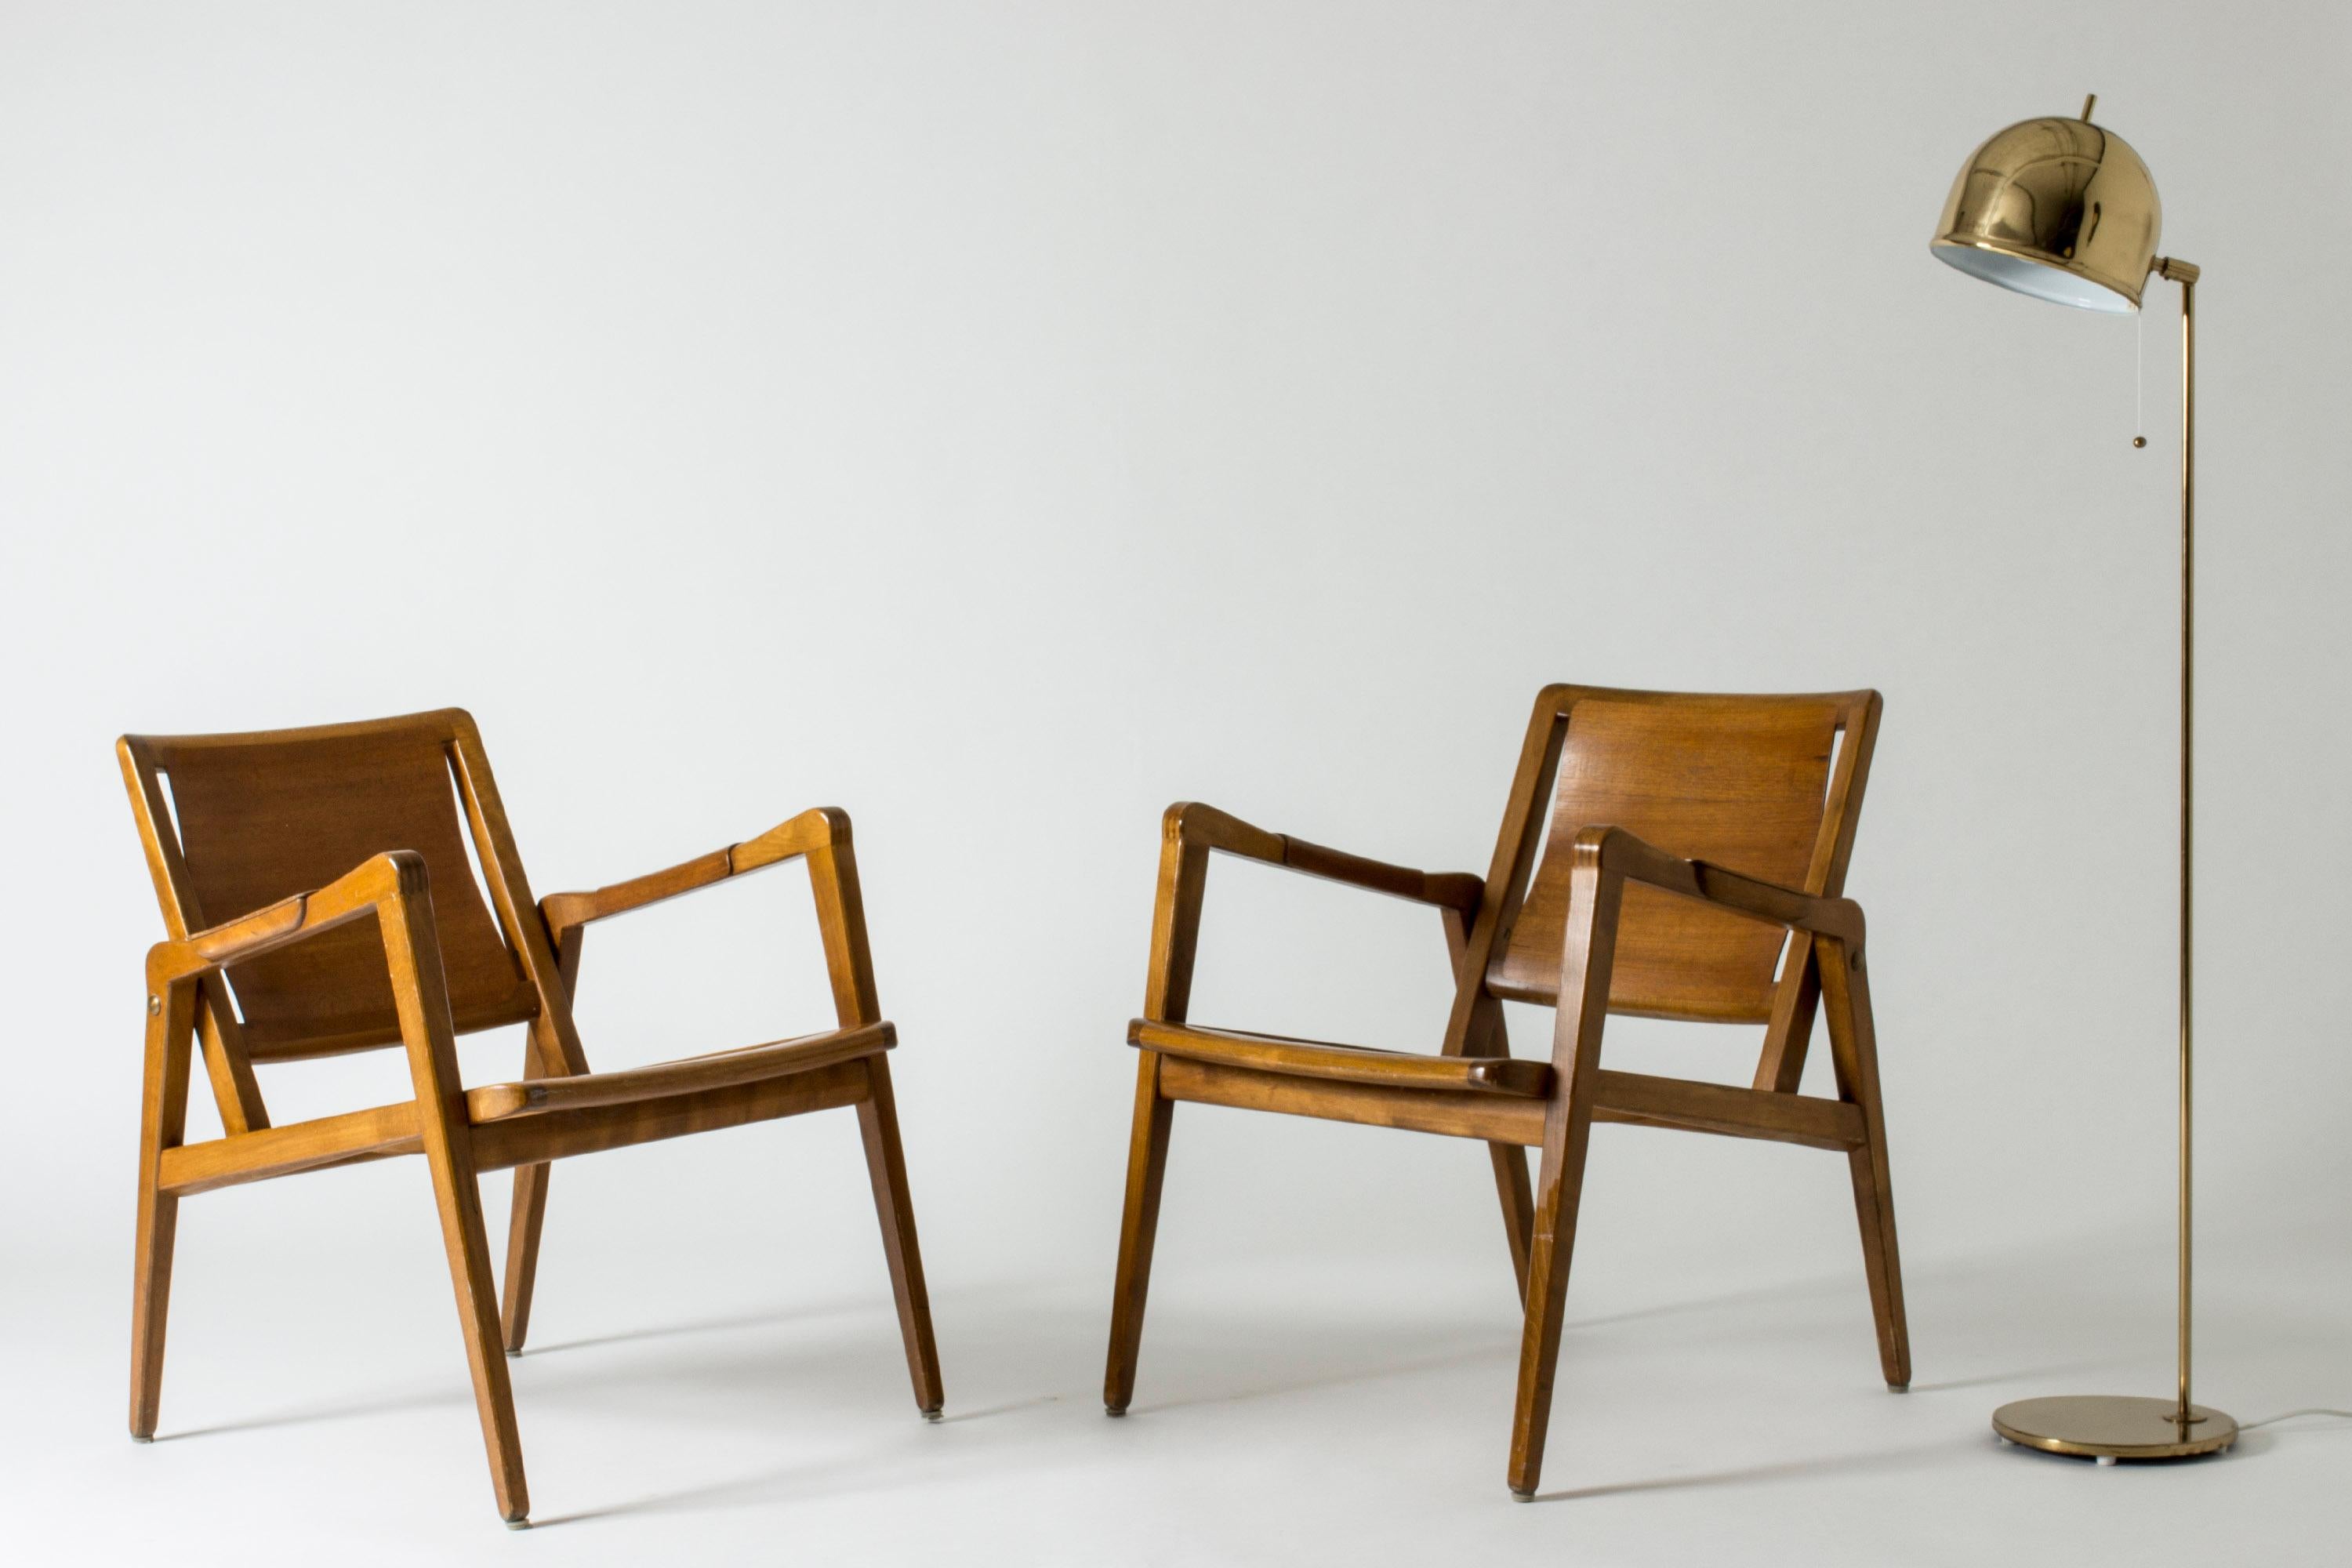 Pair of rare lounge chairs by Axel Larsson made entirely from wood in a warm color. Casually elegant design. The seats and backs follow the form of the body, neat wooden details on the armrests.

Measure: Seat height 40 cm.

  